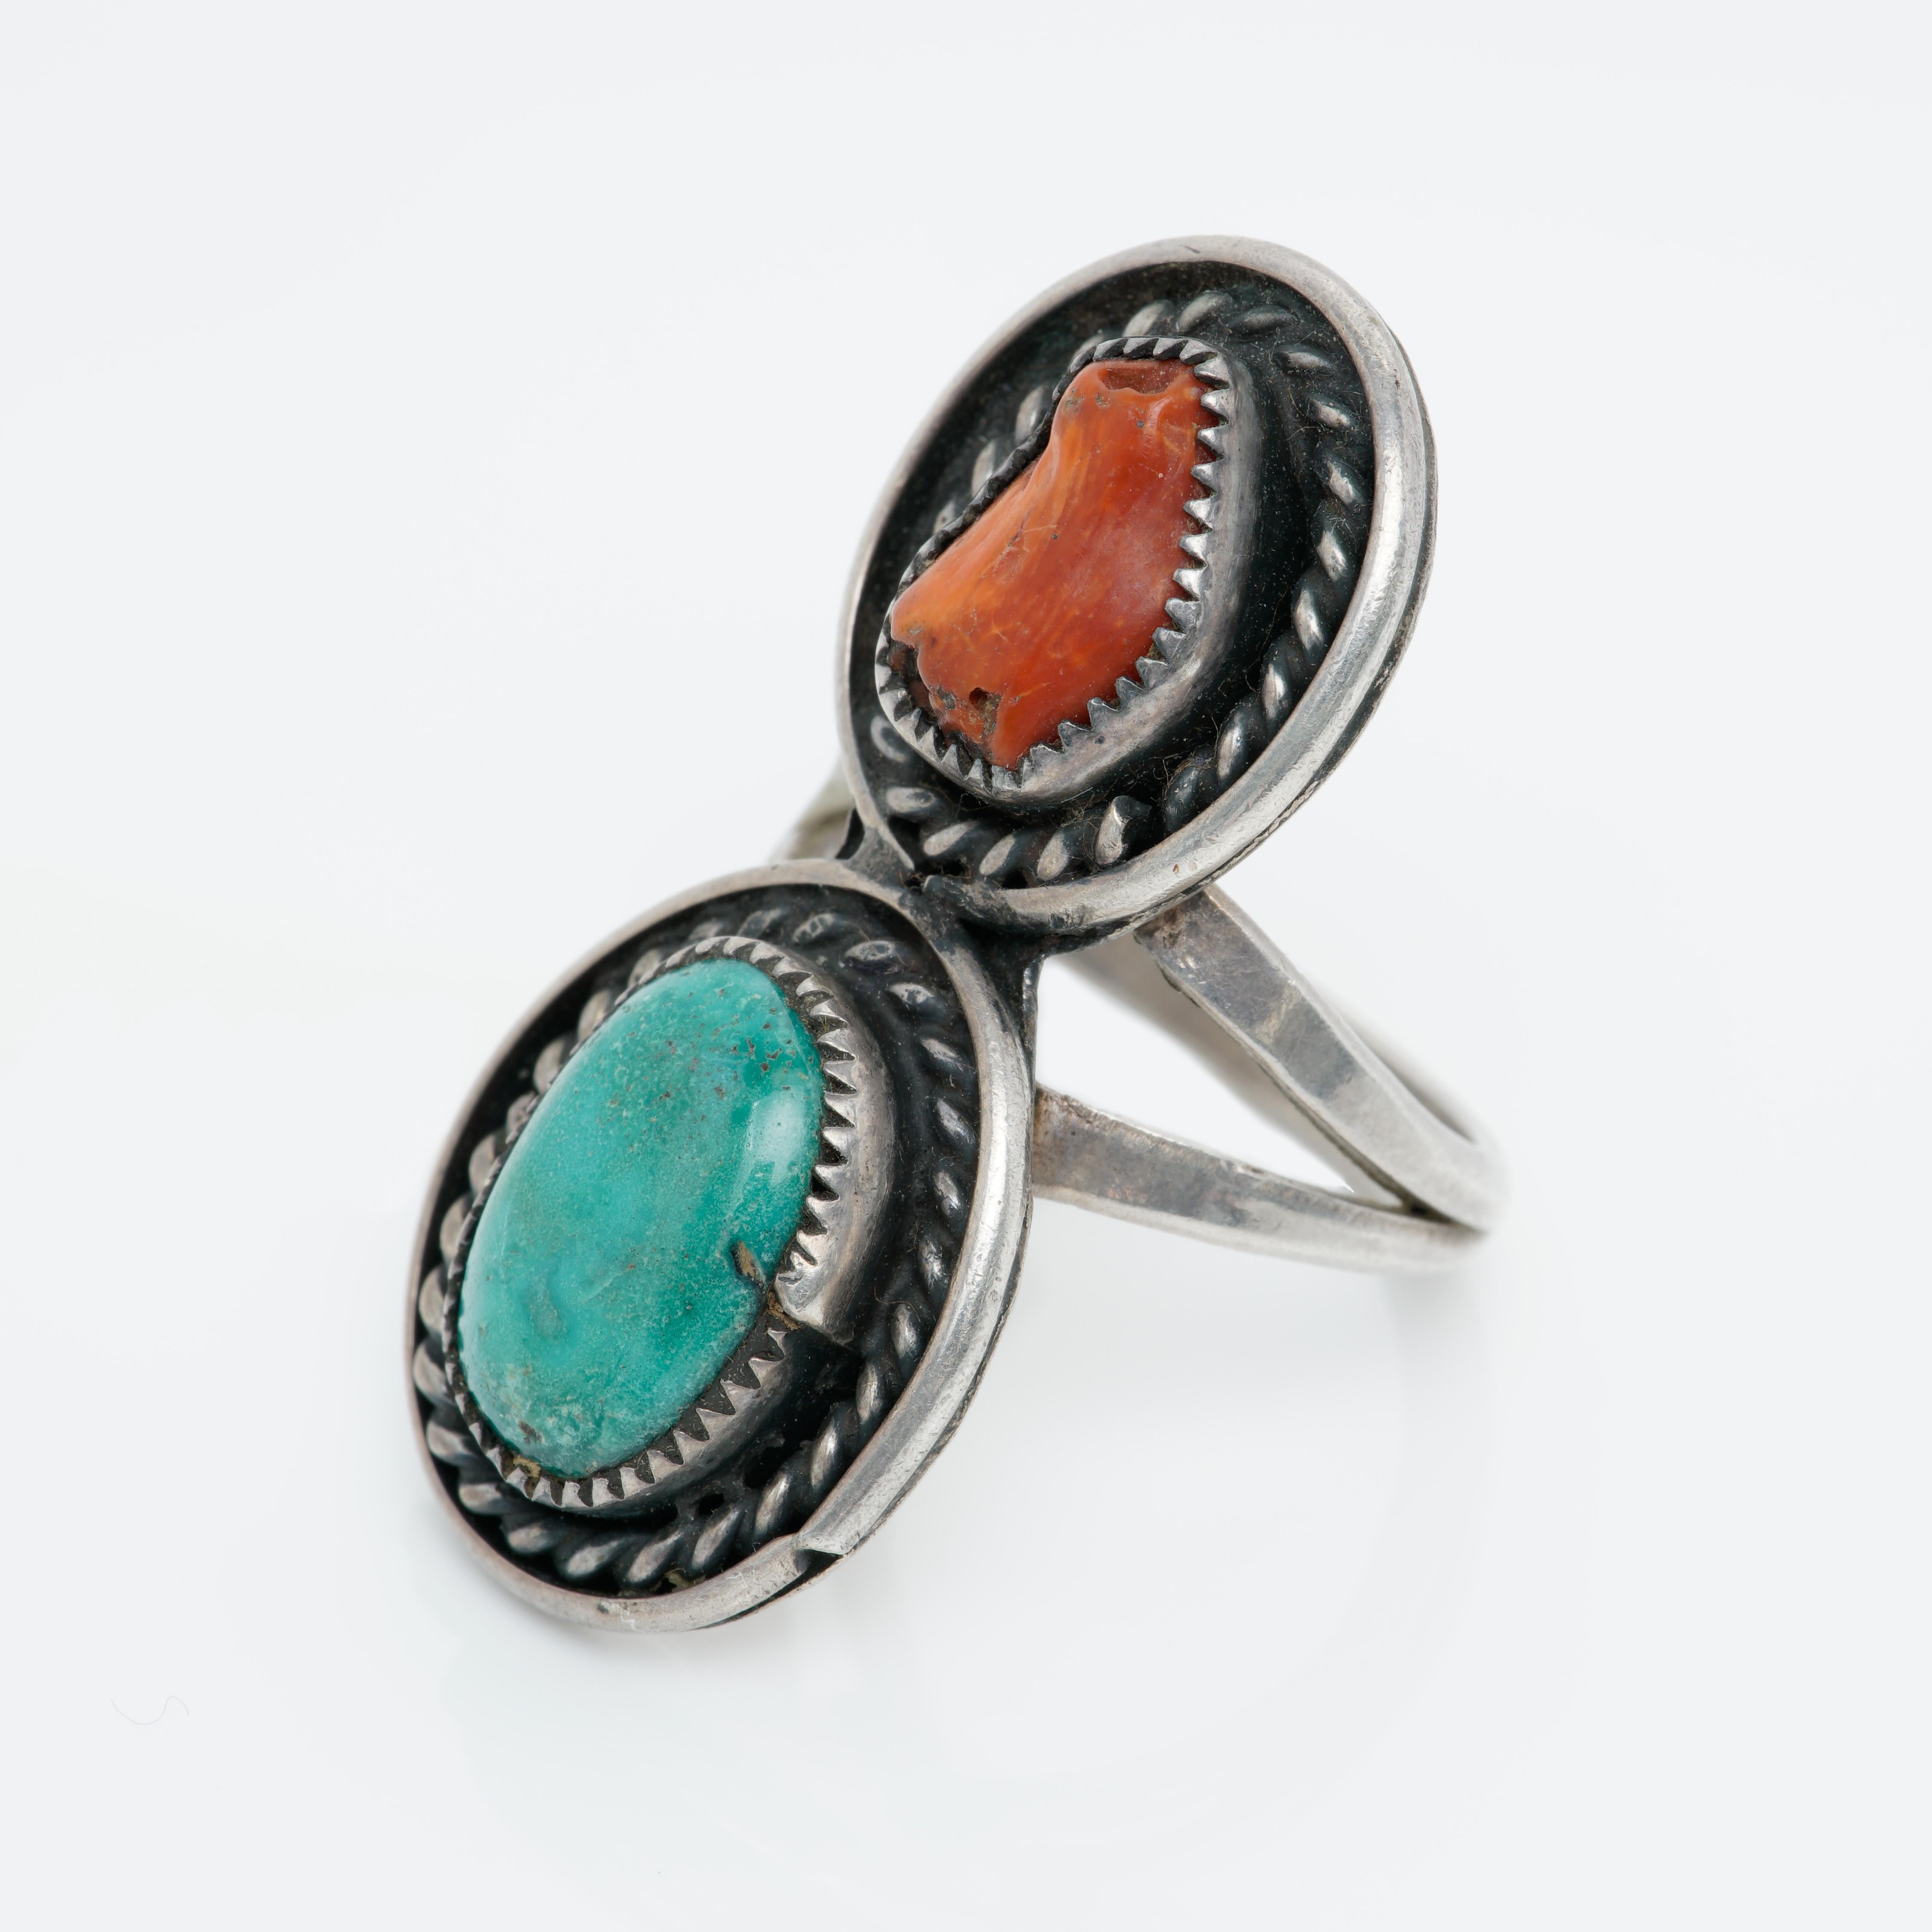 Signed Jane Yikaazba Popovitch Native American Silver, Coral and Turquoise Ring c. 1970s

Hand-forged and hand-engraved Sterling Silver, Natural Coral Branch and Turquoise, beautiful detail and twisted rope design surrounds the stones.

Size: US